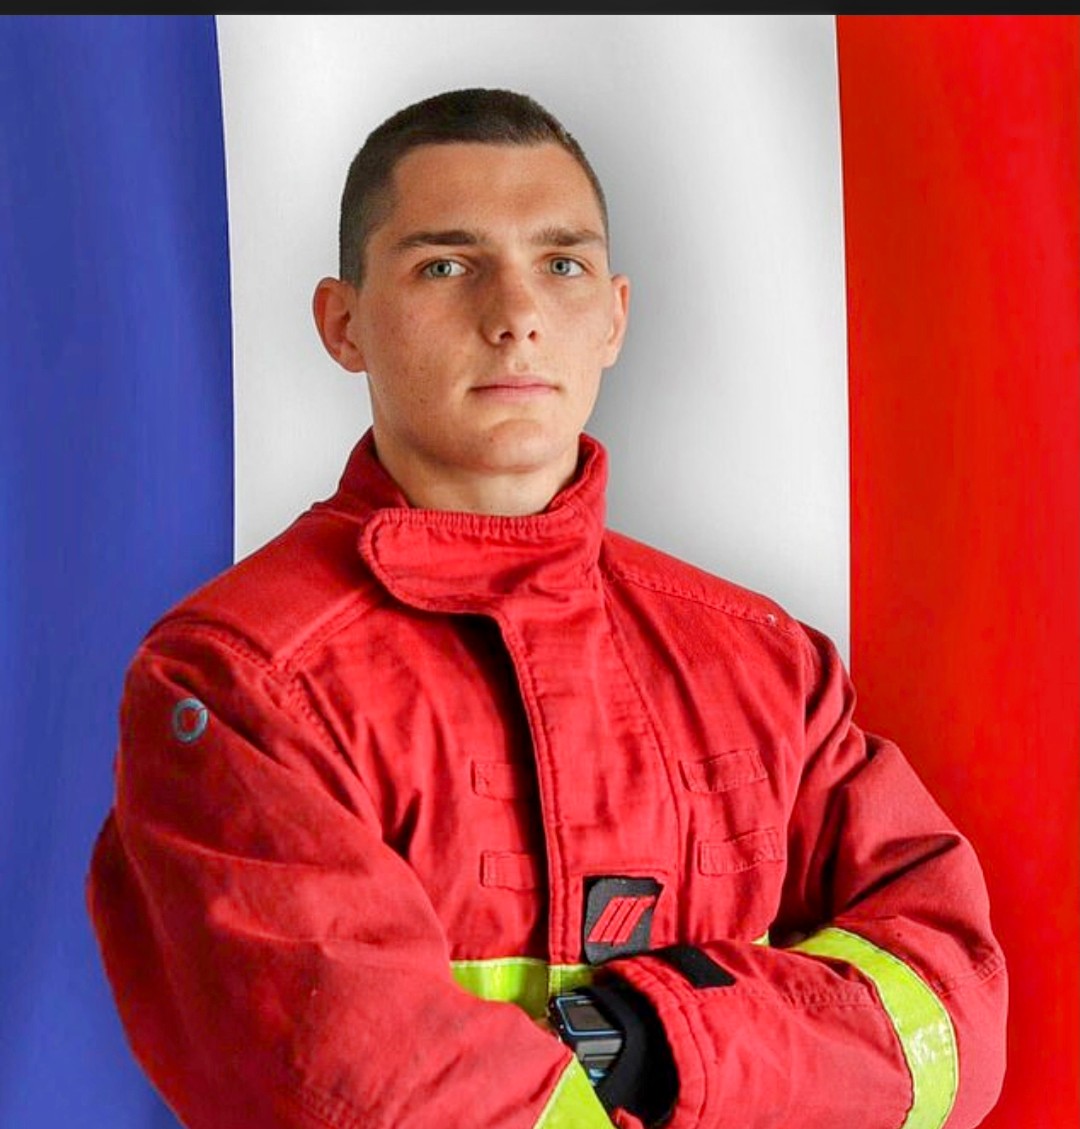 This is Dorian Damelincourt a 24 year old French firefighter, last night he died while fighting a massive blaze started by rioters in Saint Denis. Who will protest over his death, who will care for his family while #parisburns #parisriots #parishasfallen #RIPDenis